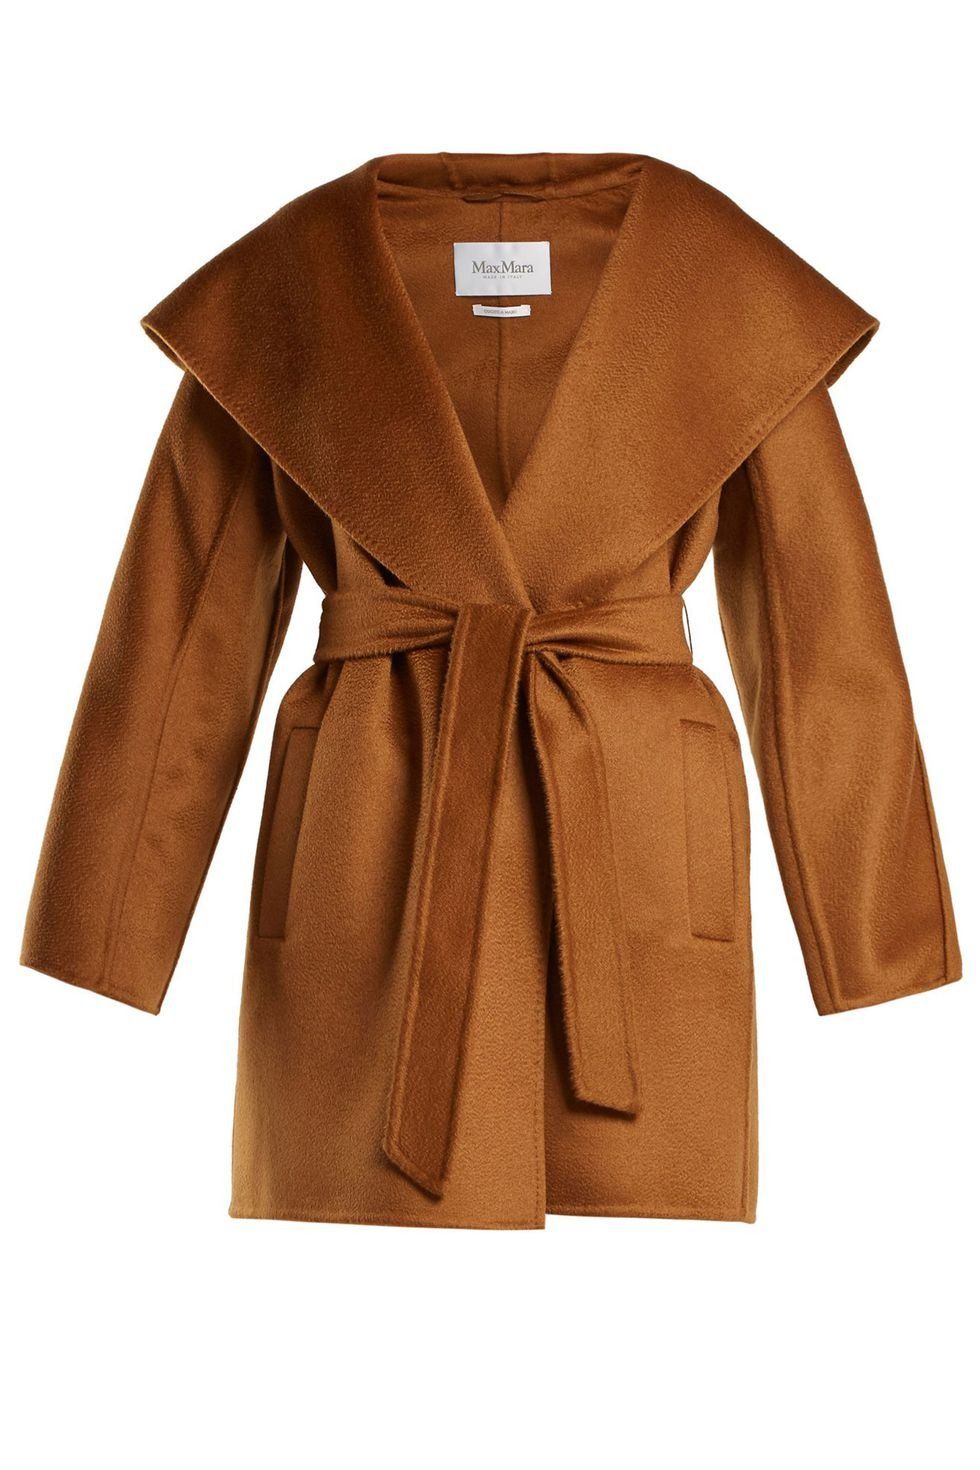 Clothing, Outerwear, Coat, Sleeve, Brown, Overcoat, Trench coat, Tan, Collar, Jacket, 